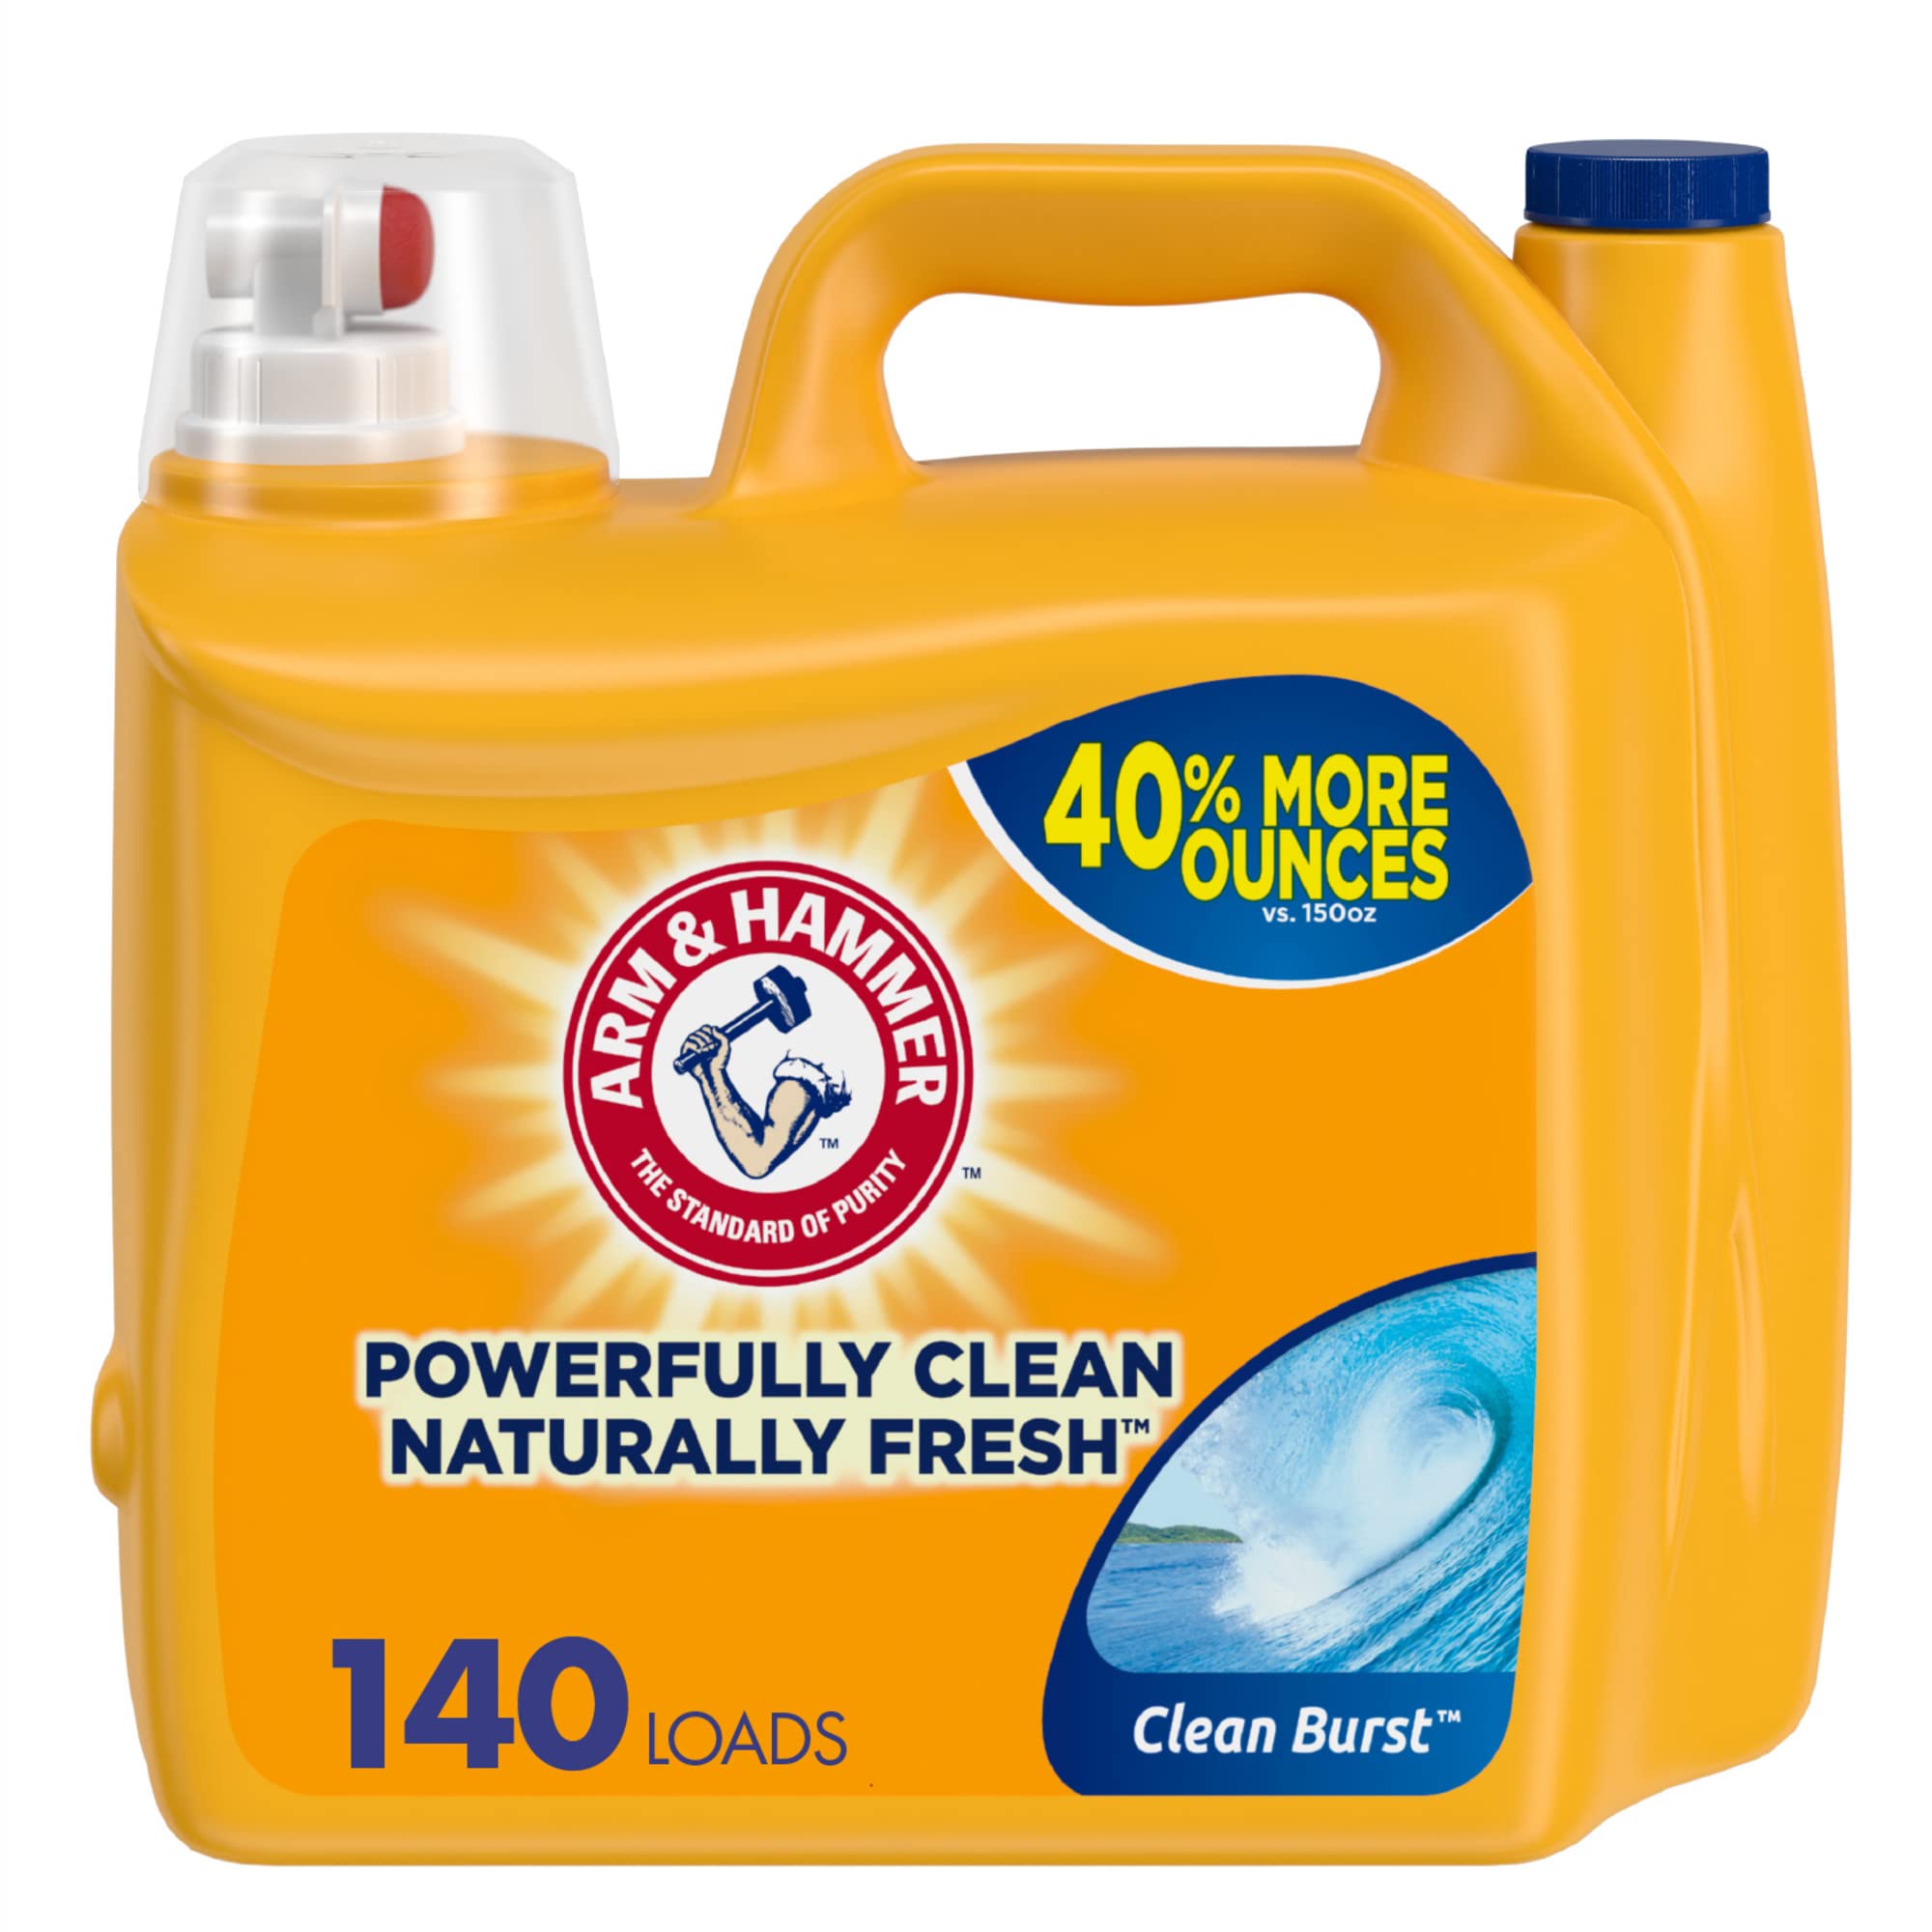 Arm & Hammer Laundry Detergent He, Clean Burst, 210 Ounce by Arm & Hammer